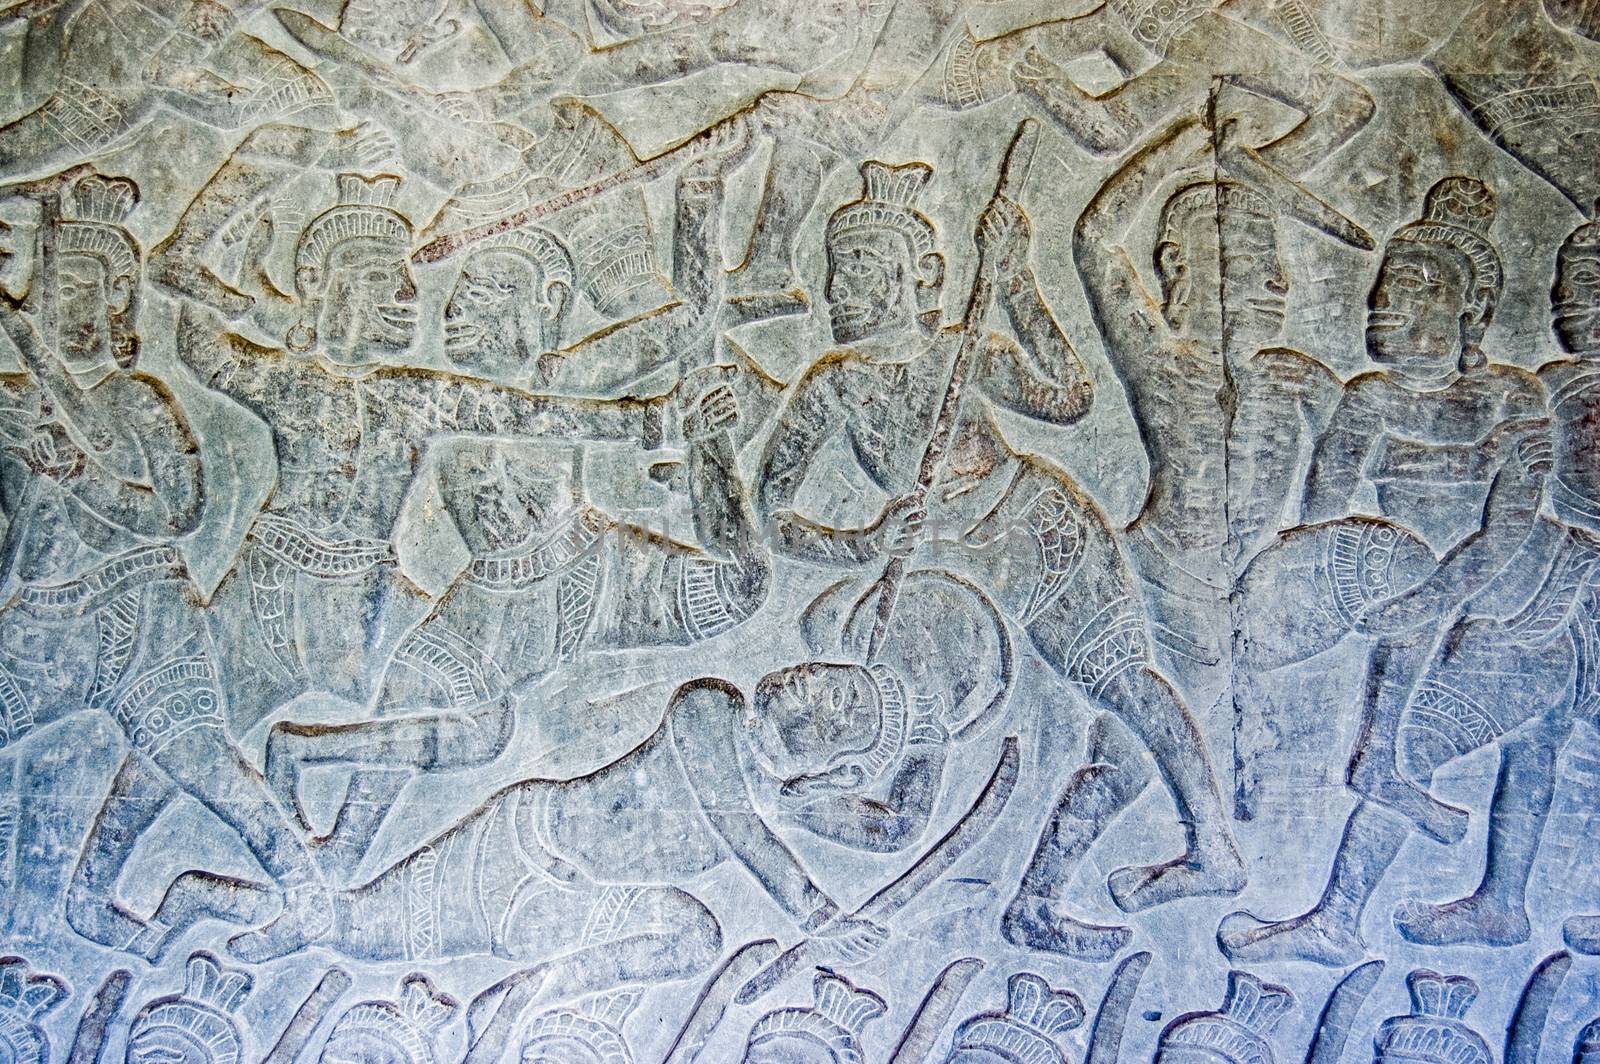 Ancient Khmer bas relief carving showing a battle with a soldier killed with a spear. Angkor Wat temple, Siem Reap, Cambodia